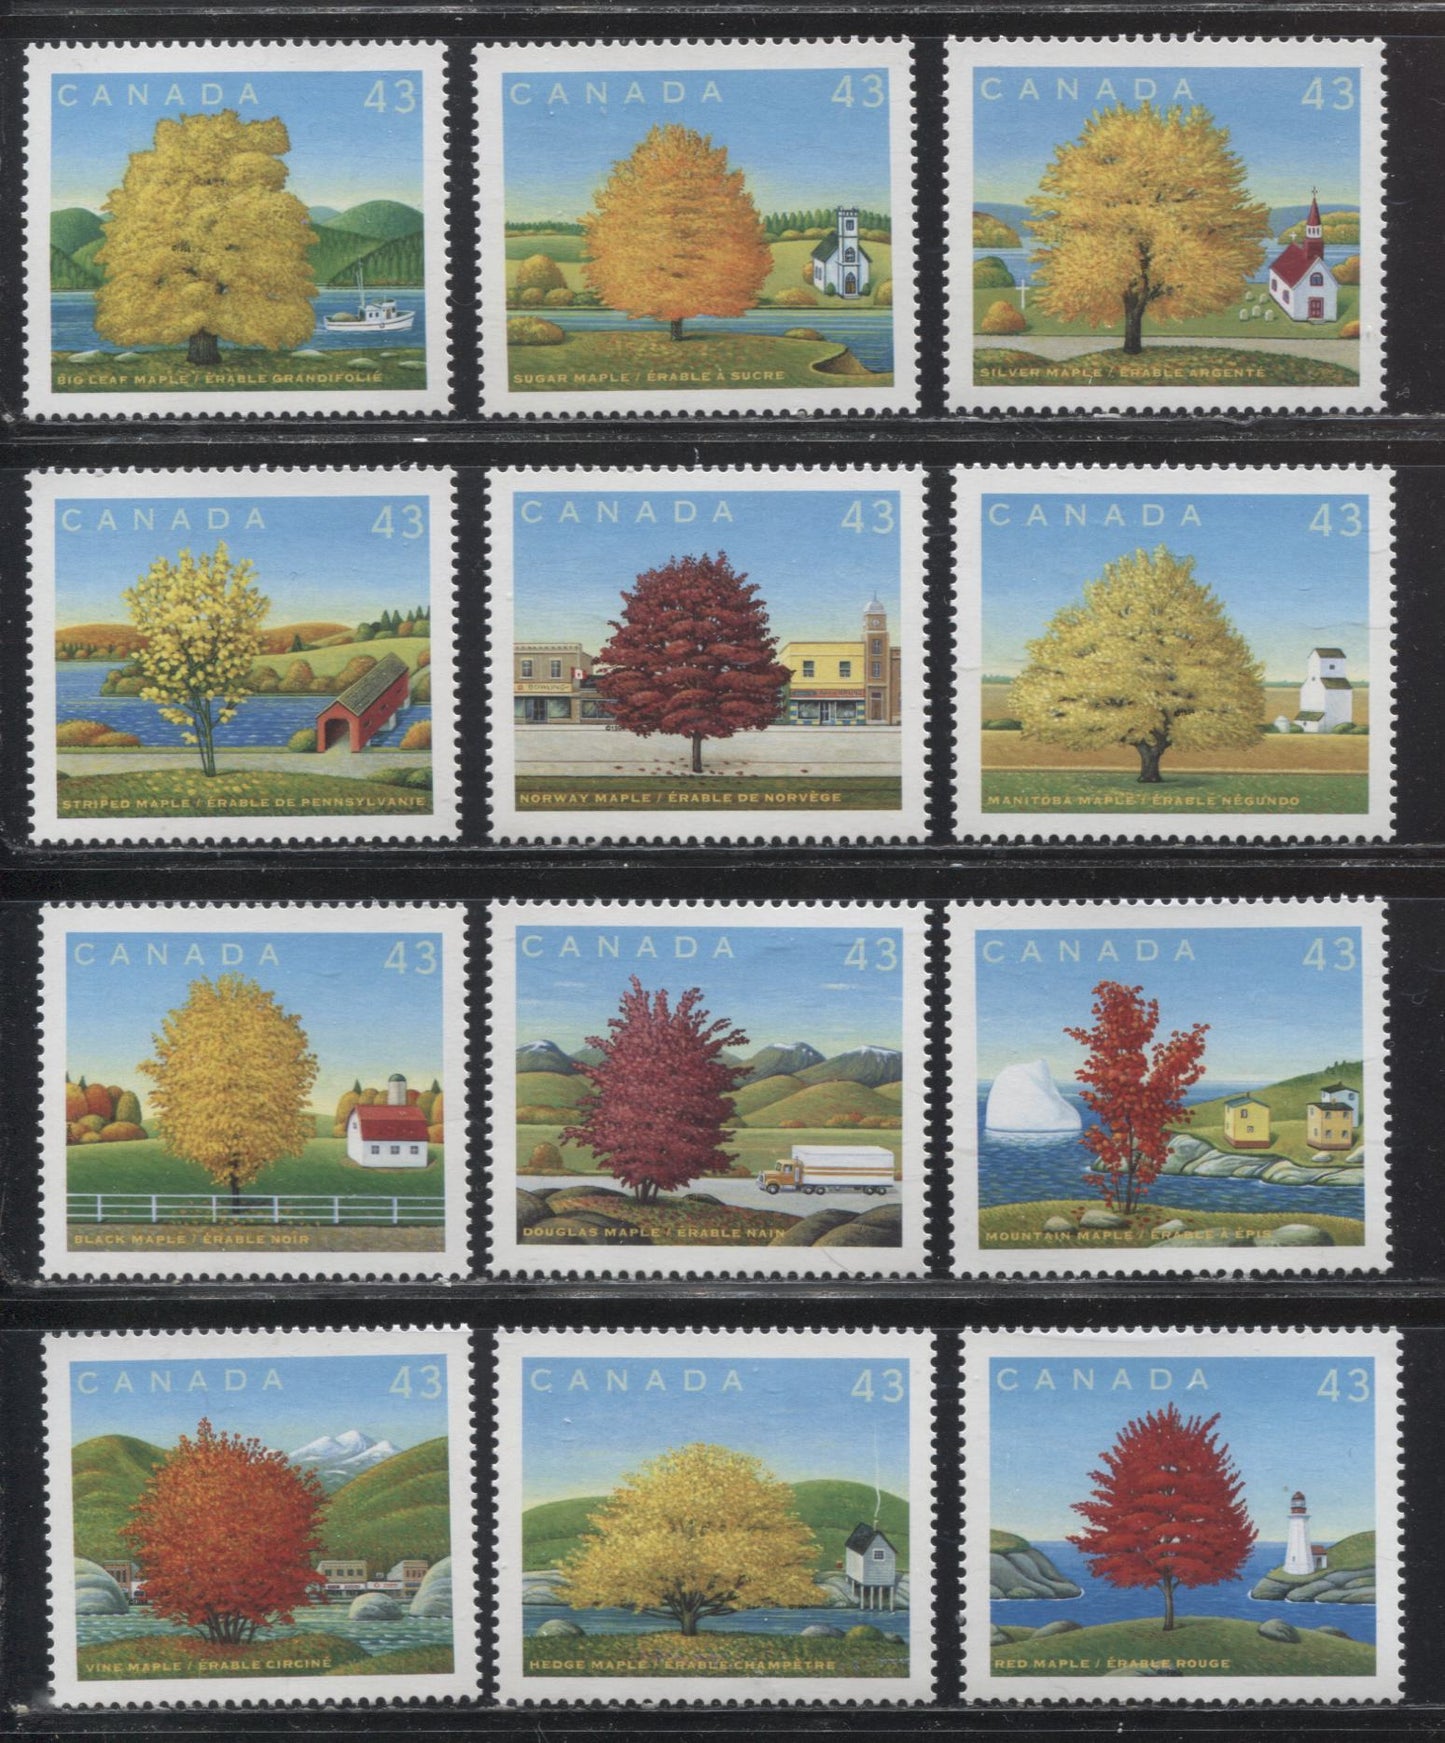 Lot 201 Canada #1524a-l 43c Multicoloured Maple Trees 1994 Canada Day Issue, VFNH Singles From the Souvenir Sheet, on LF Paper